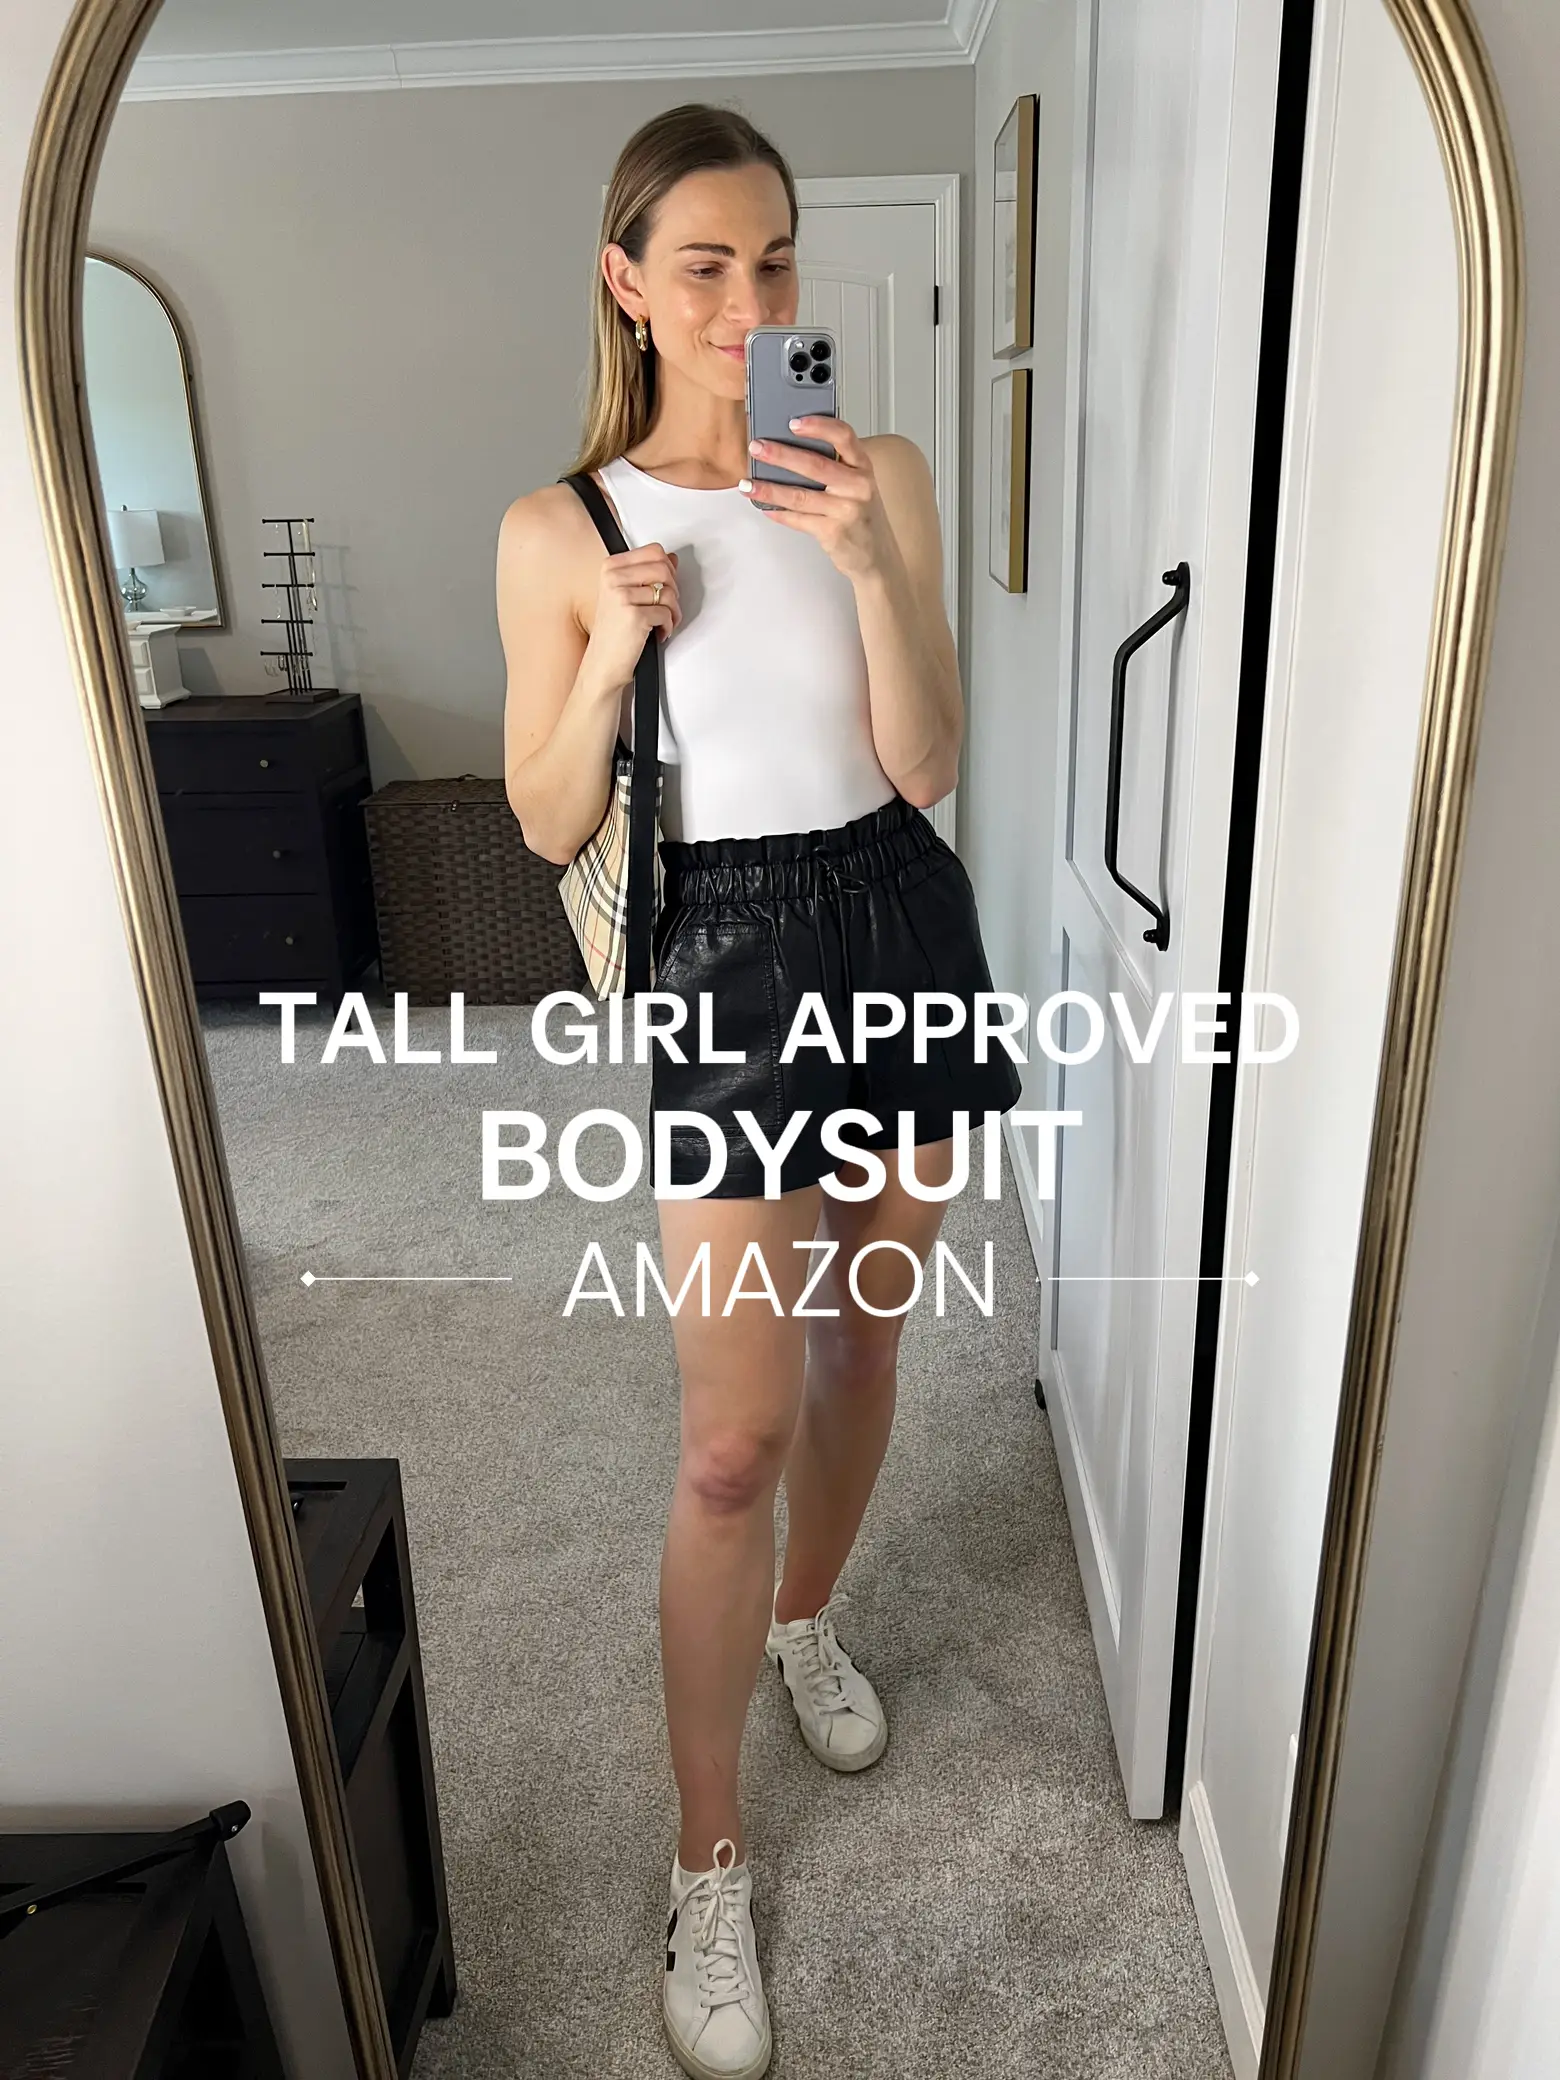 I'm 5'7” - the Skims 'fits everybody' bodysuit didn't work for me